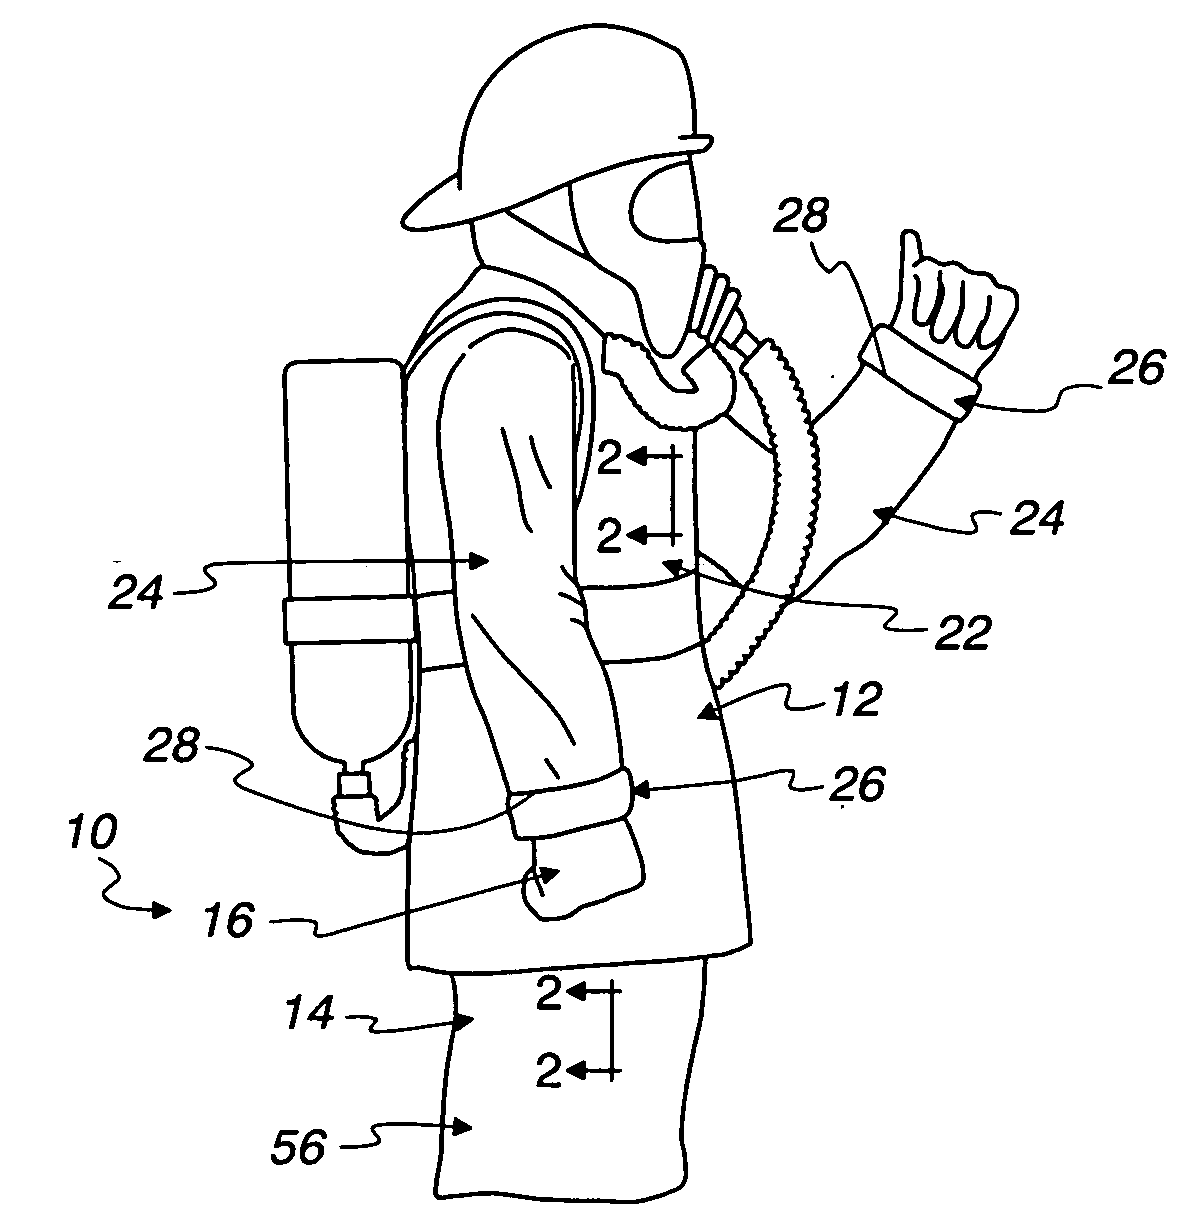 Protective garment for use by a firefighter or other emergency worker and having a detachable cuff/wristlet